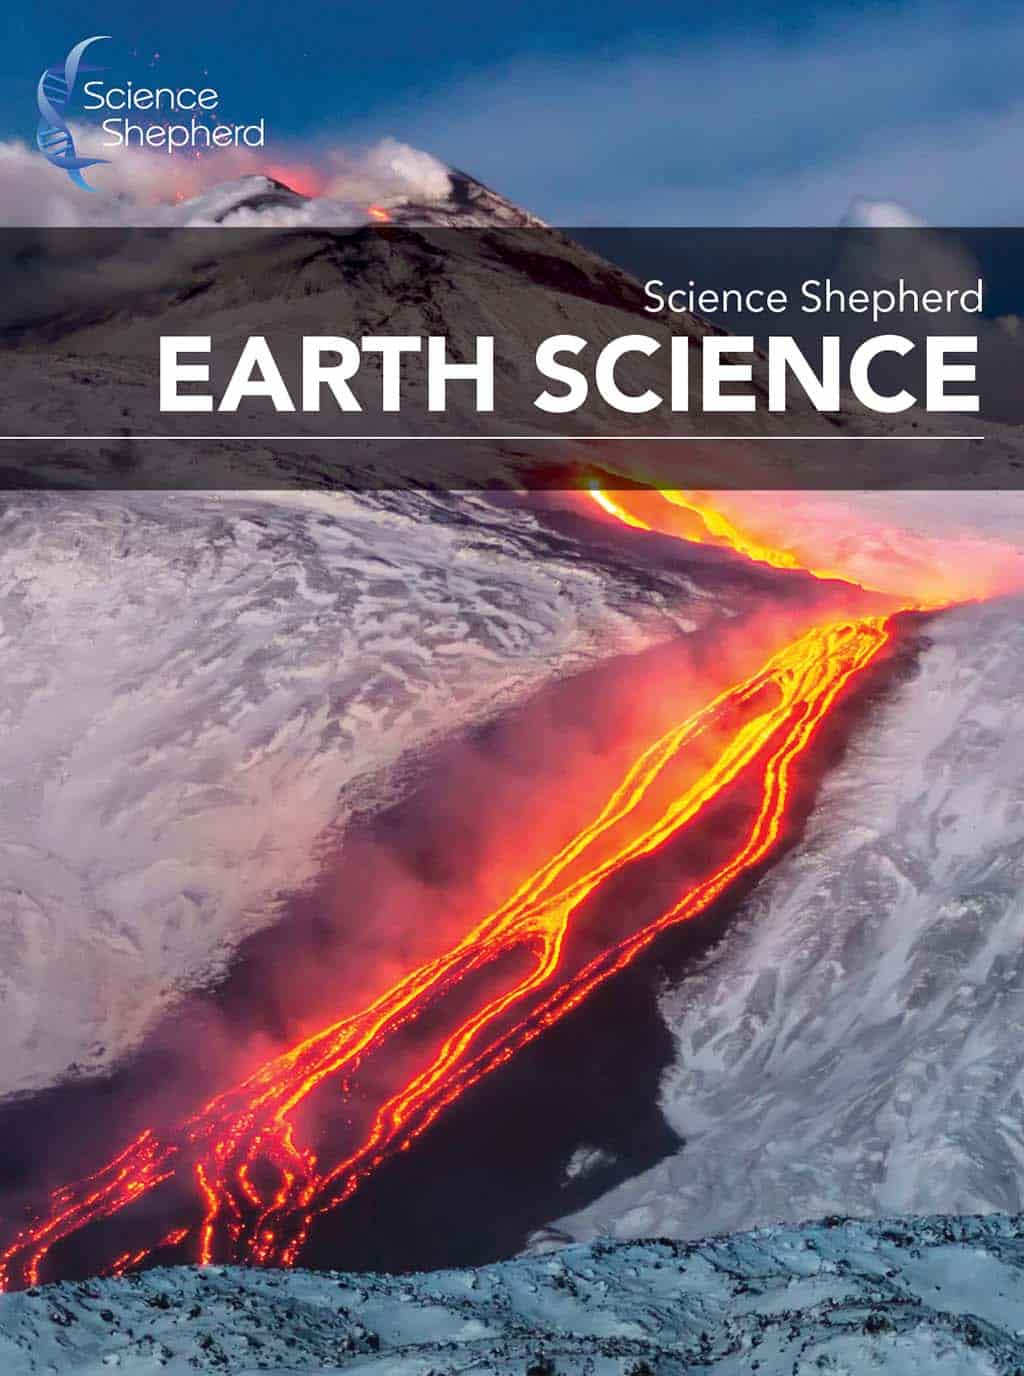 Homeschool Earth Science cover of a volcano and lava flow with snow